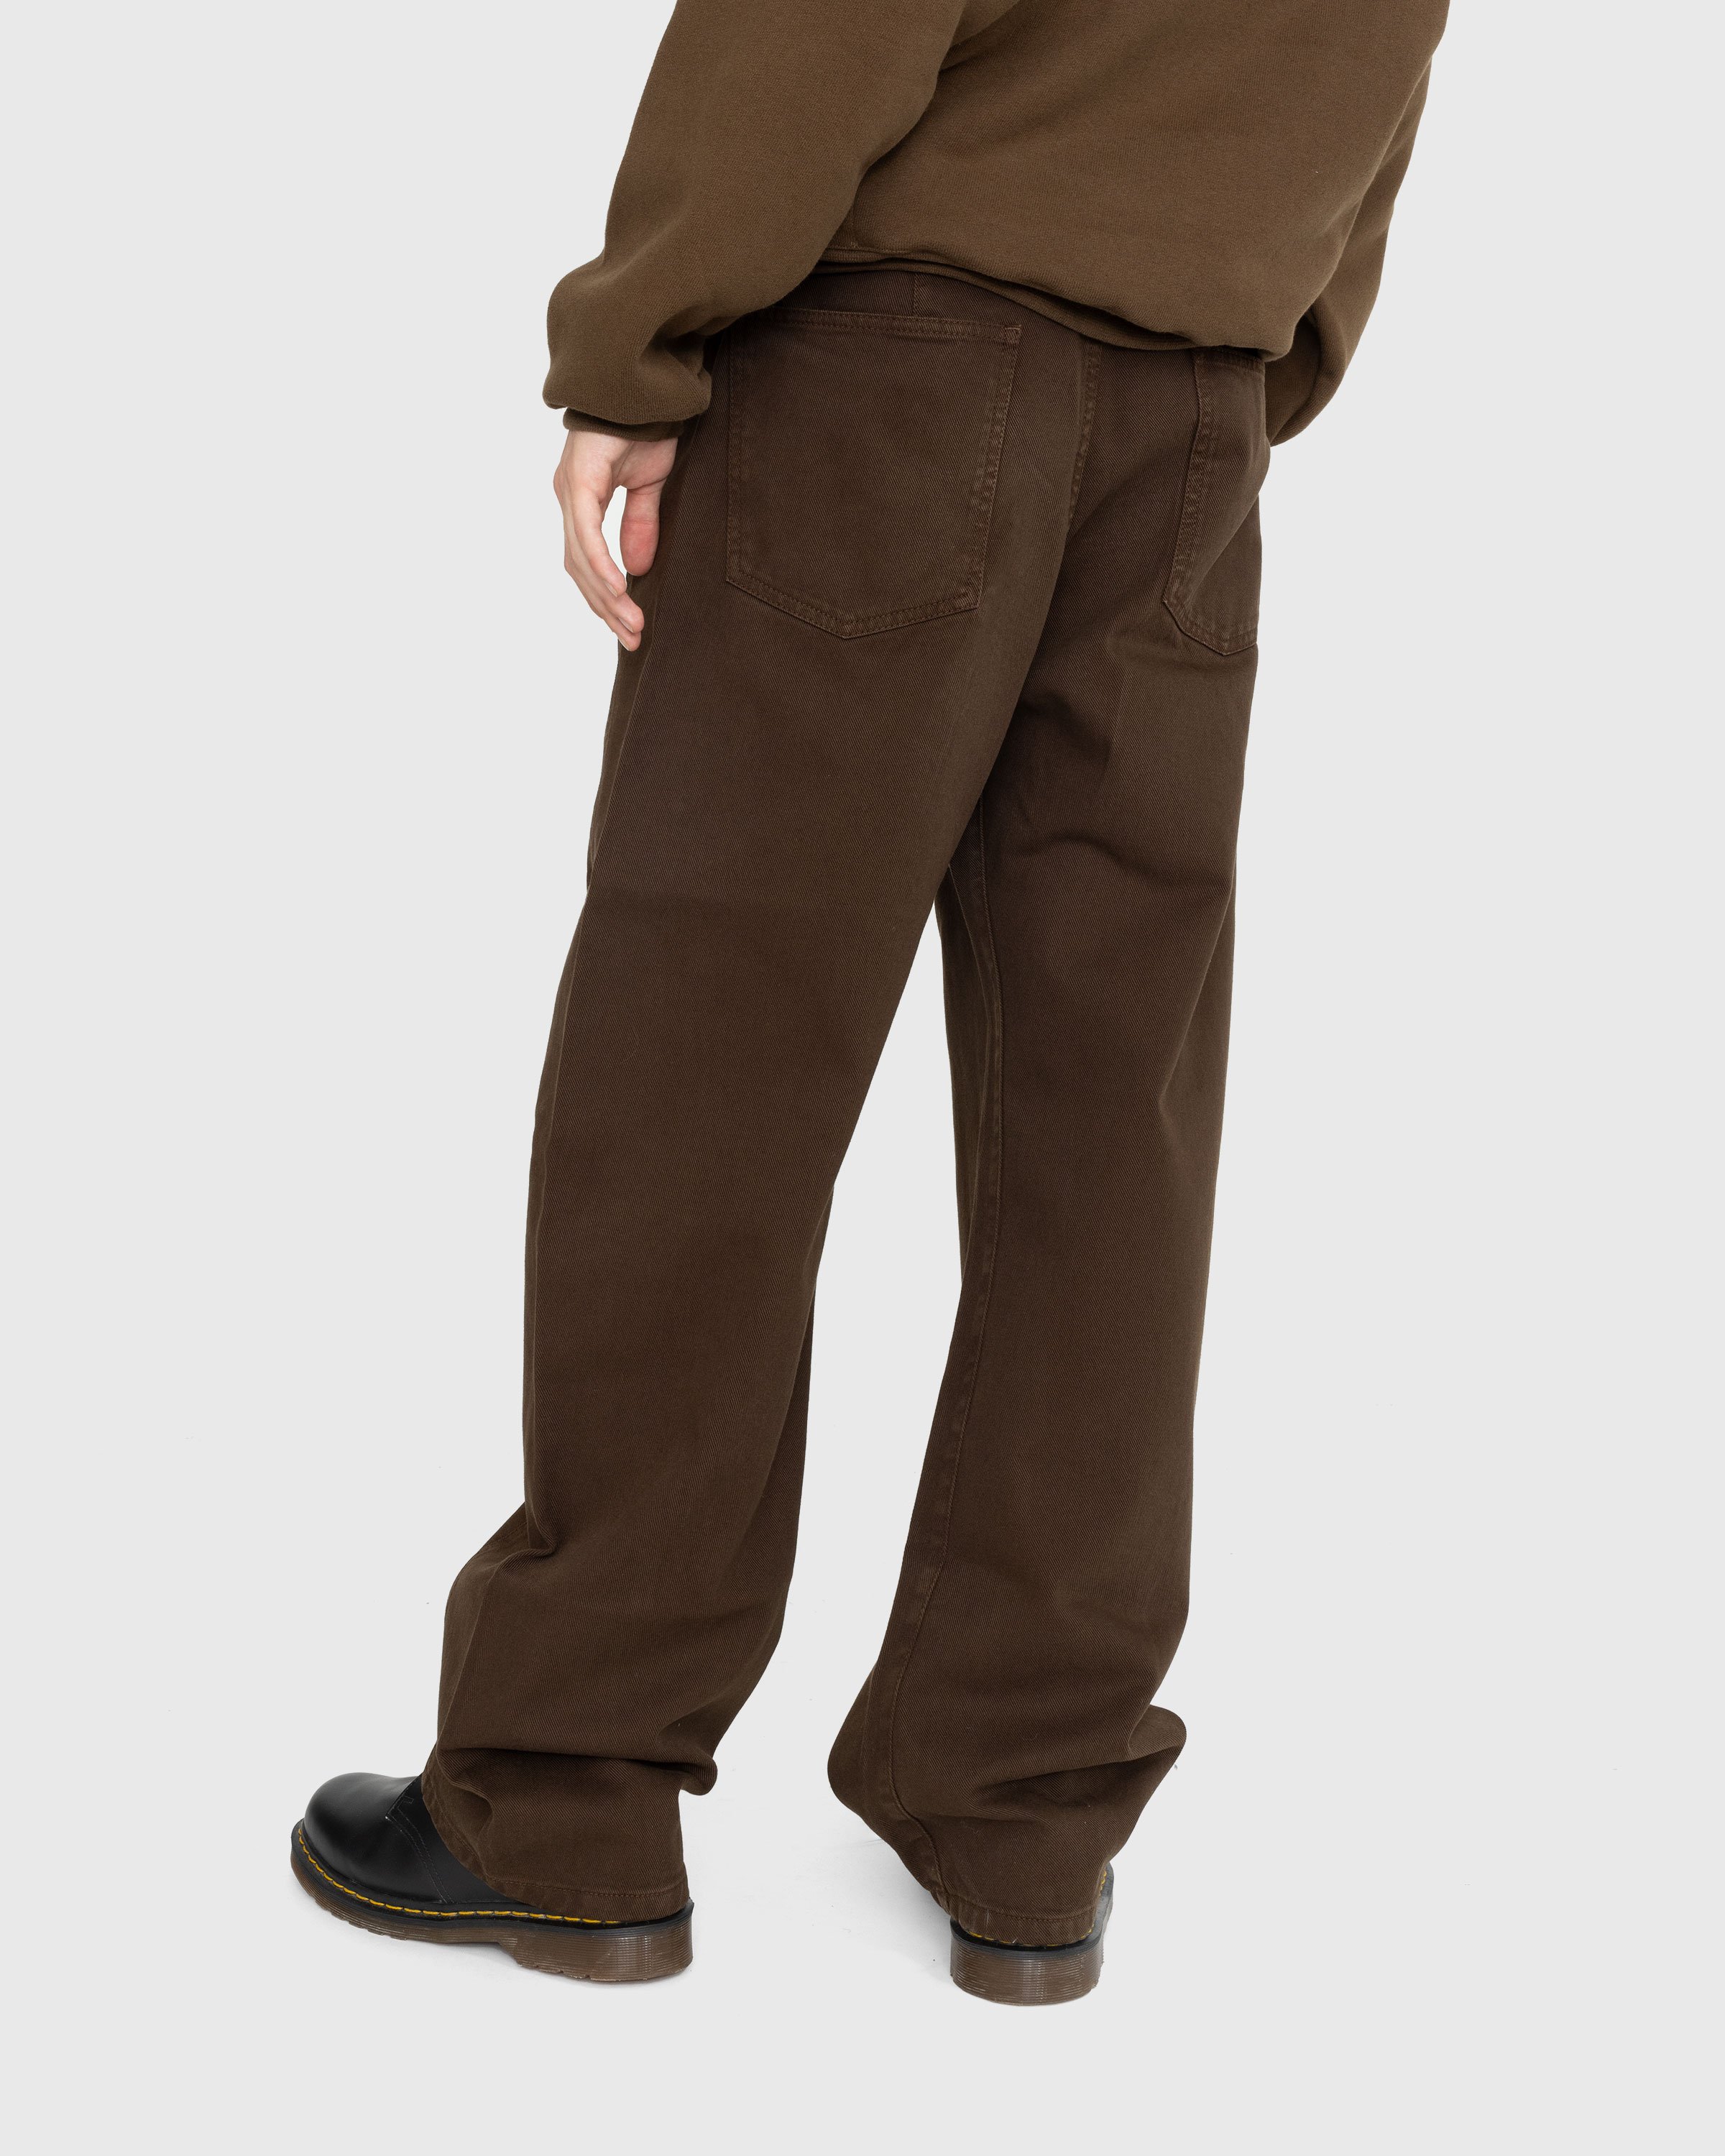 Lemaire - TWISTED BELTED CASUAL PANT - Clothing - Brown - Image 3